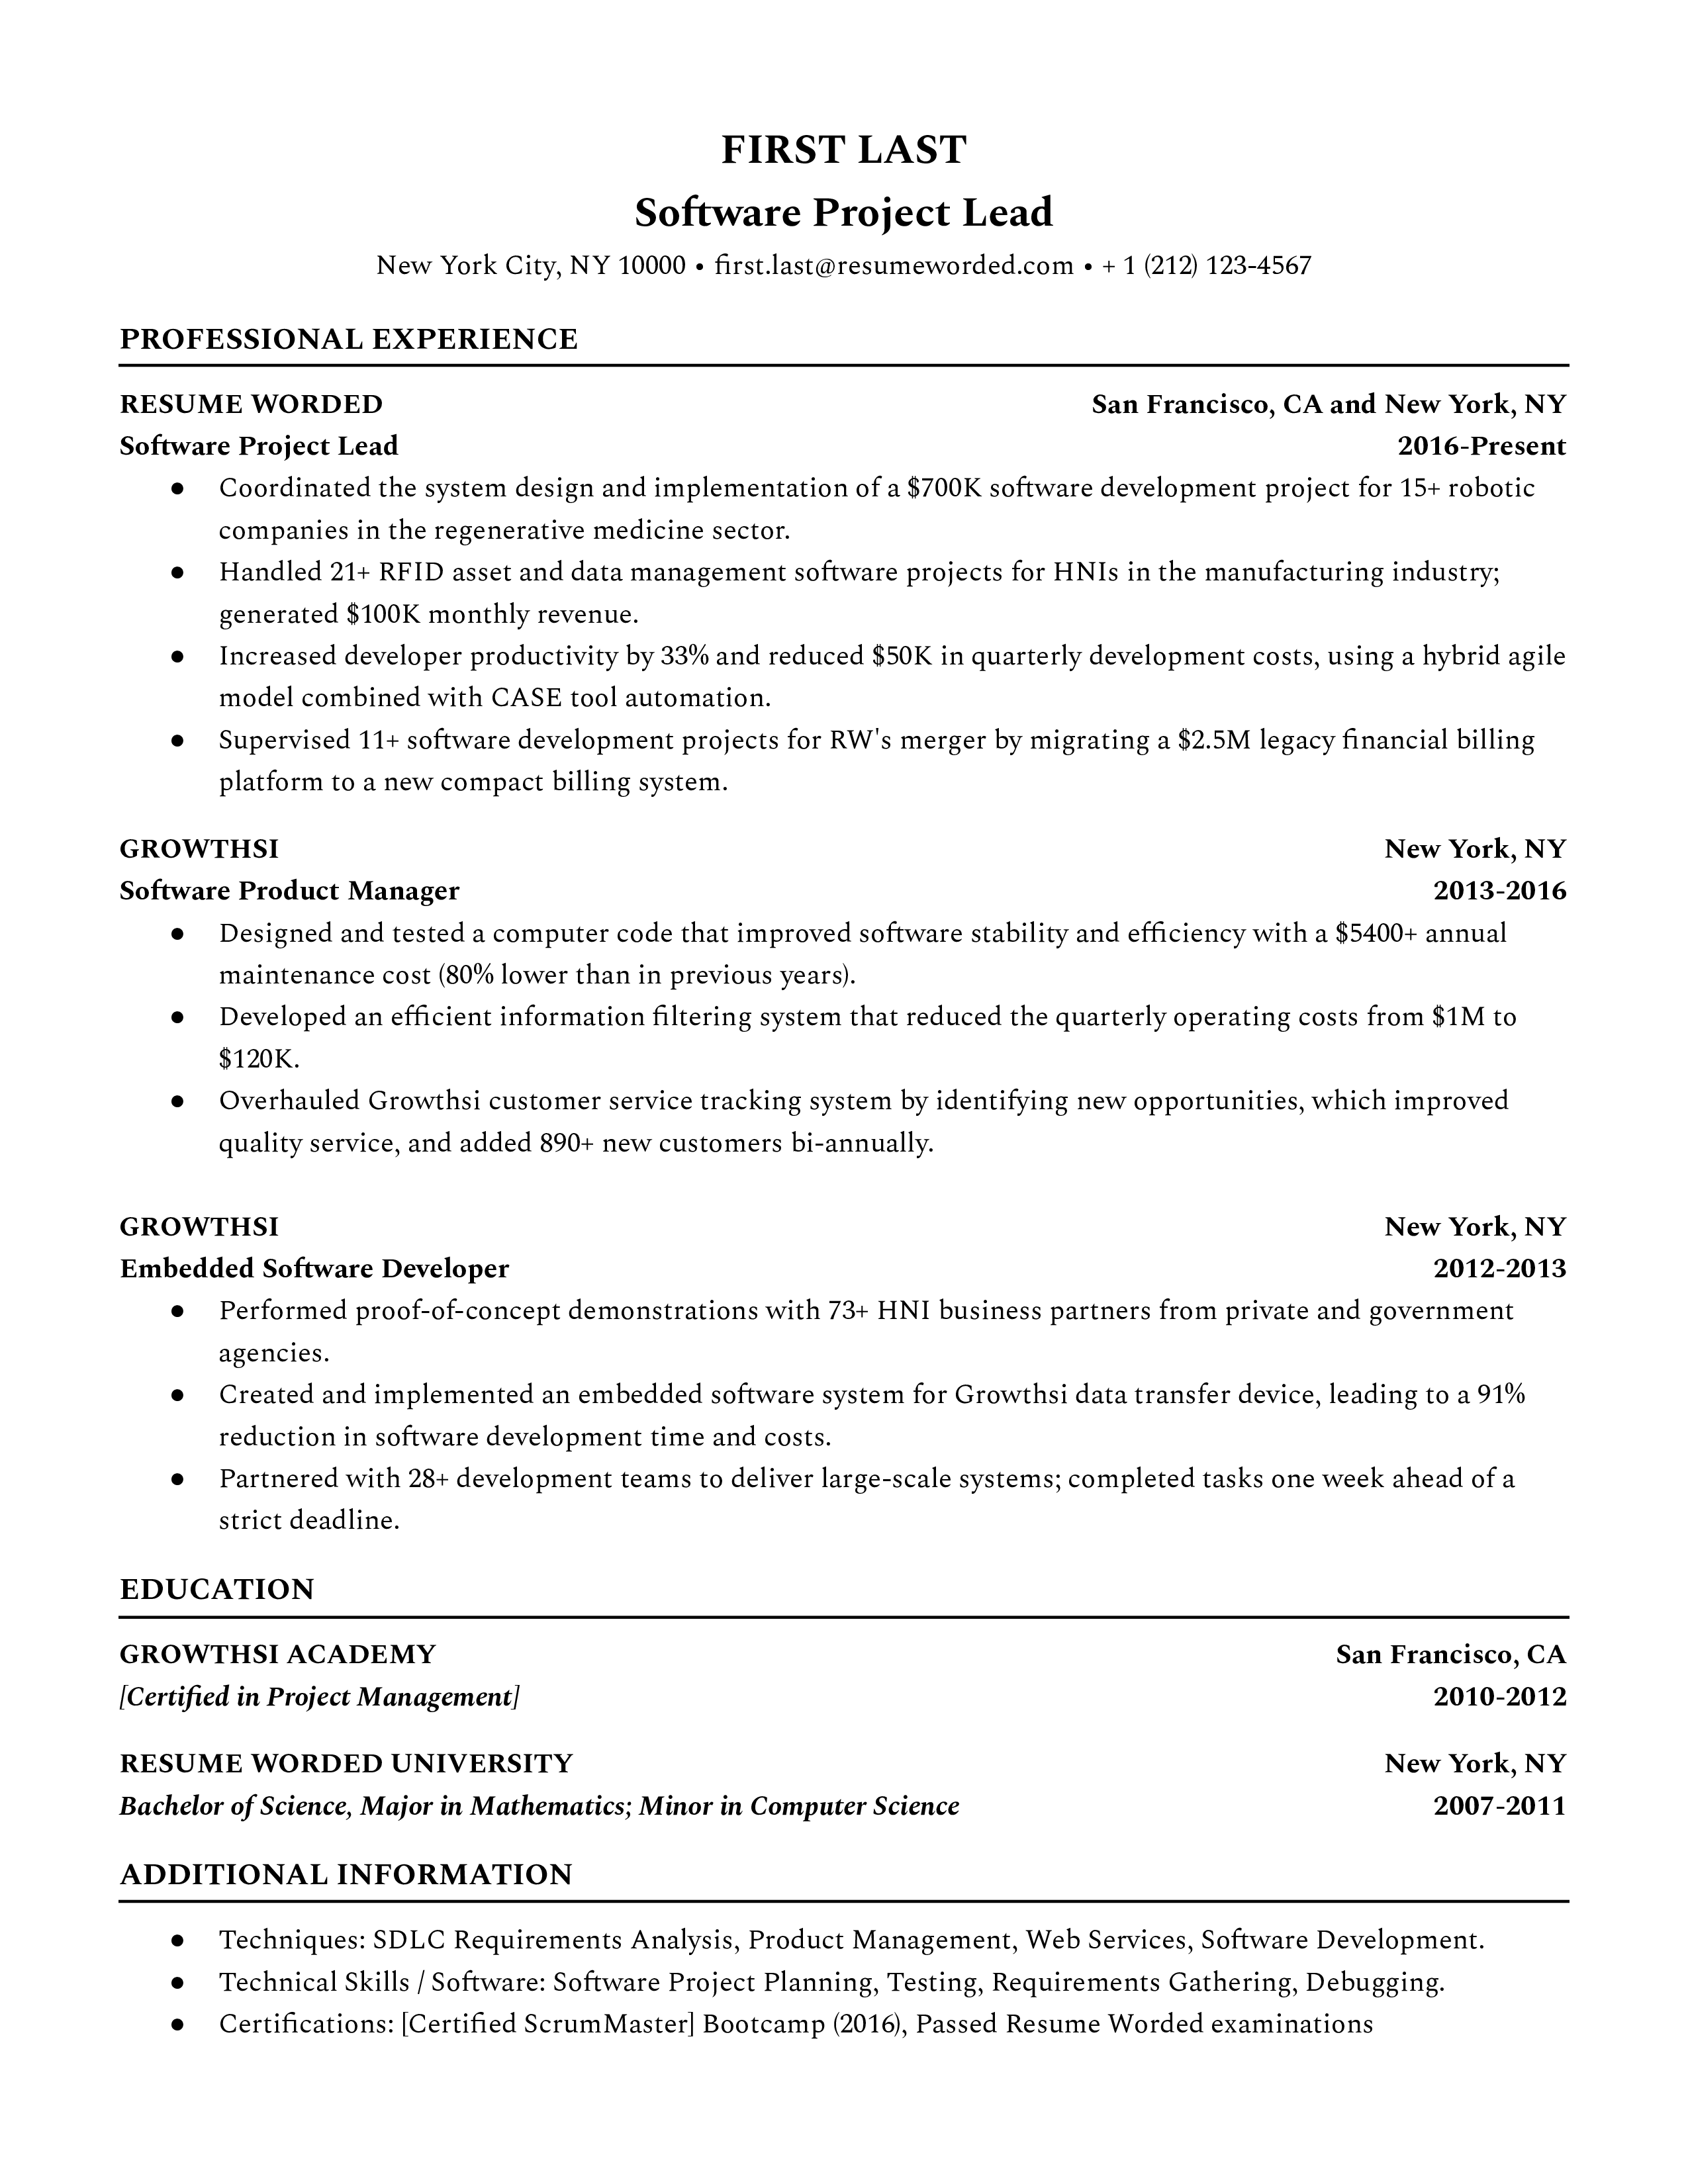 An software project leads resume template tailored to the computer science industry.